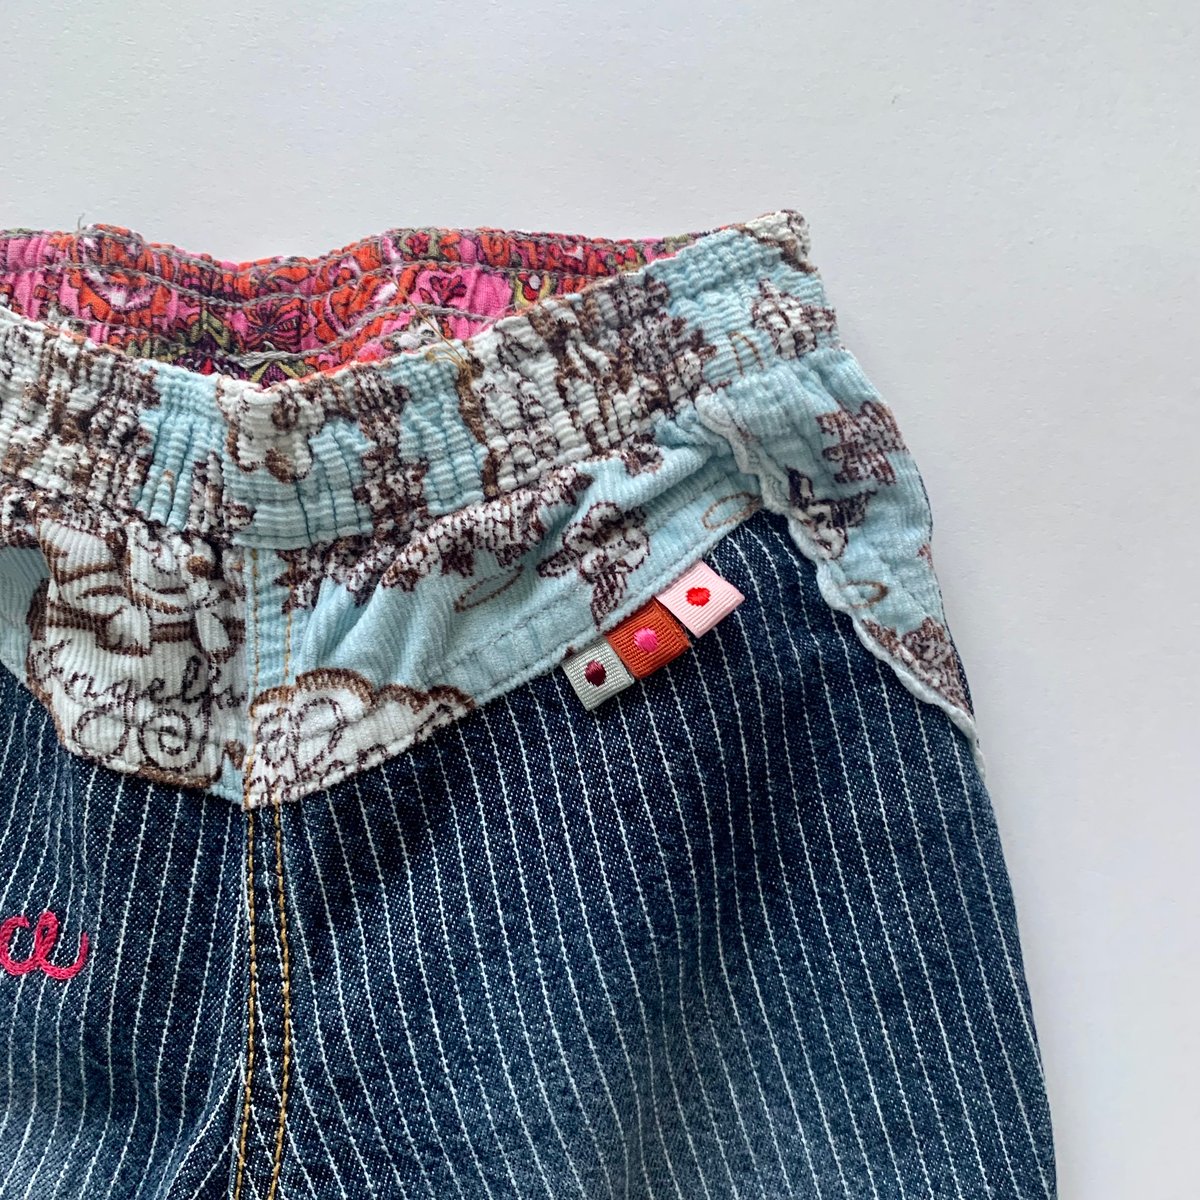 Image of Oilily wing jeans 6 months 